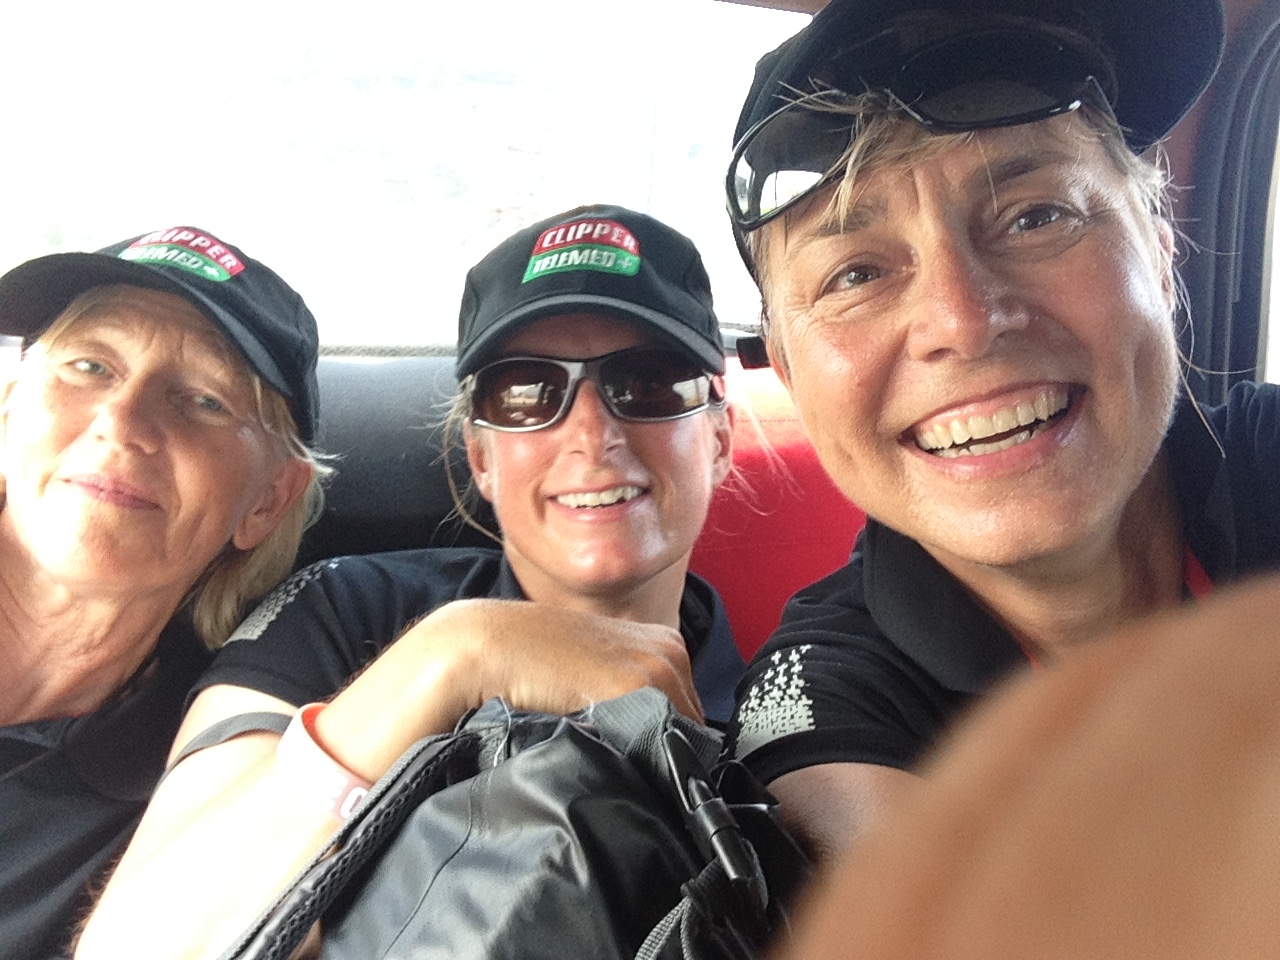 Piled into a taxi headed for the Best Western in Panama City :-D